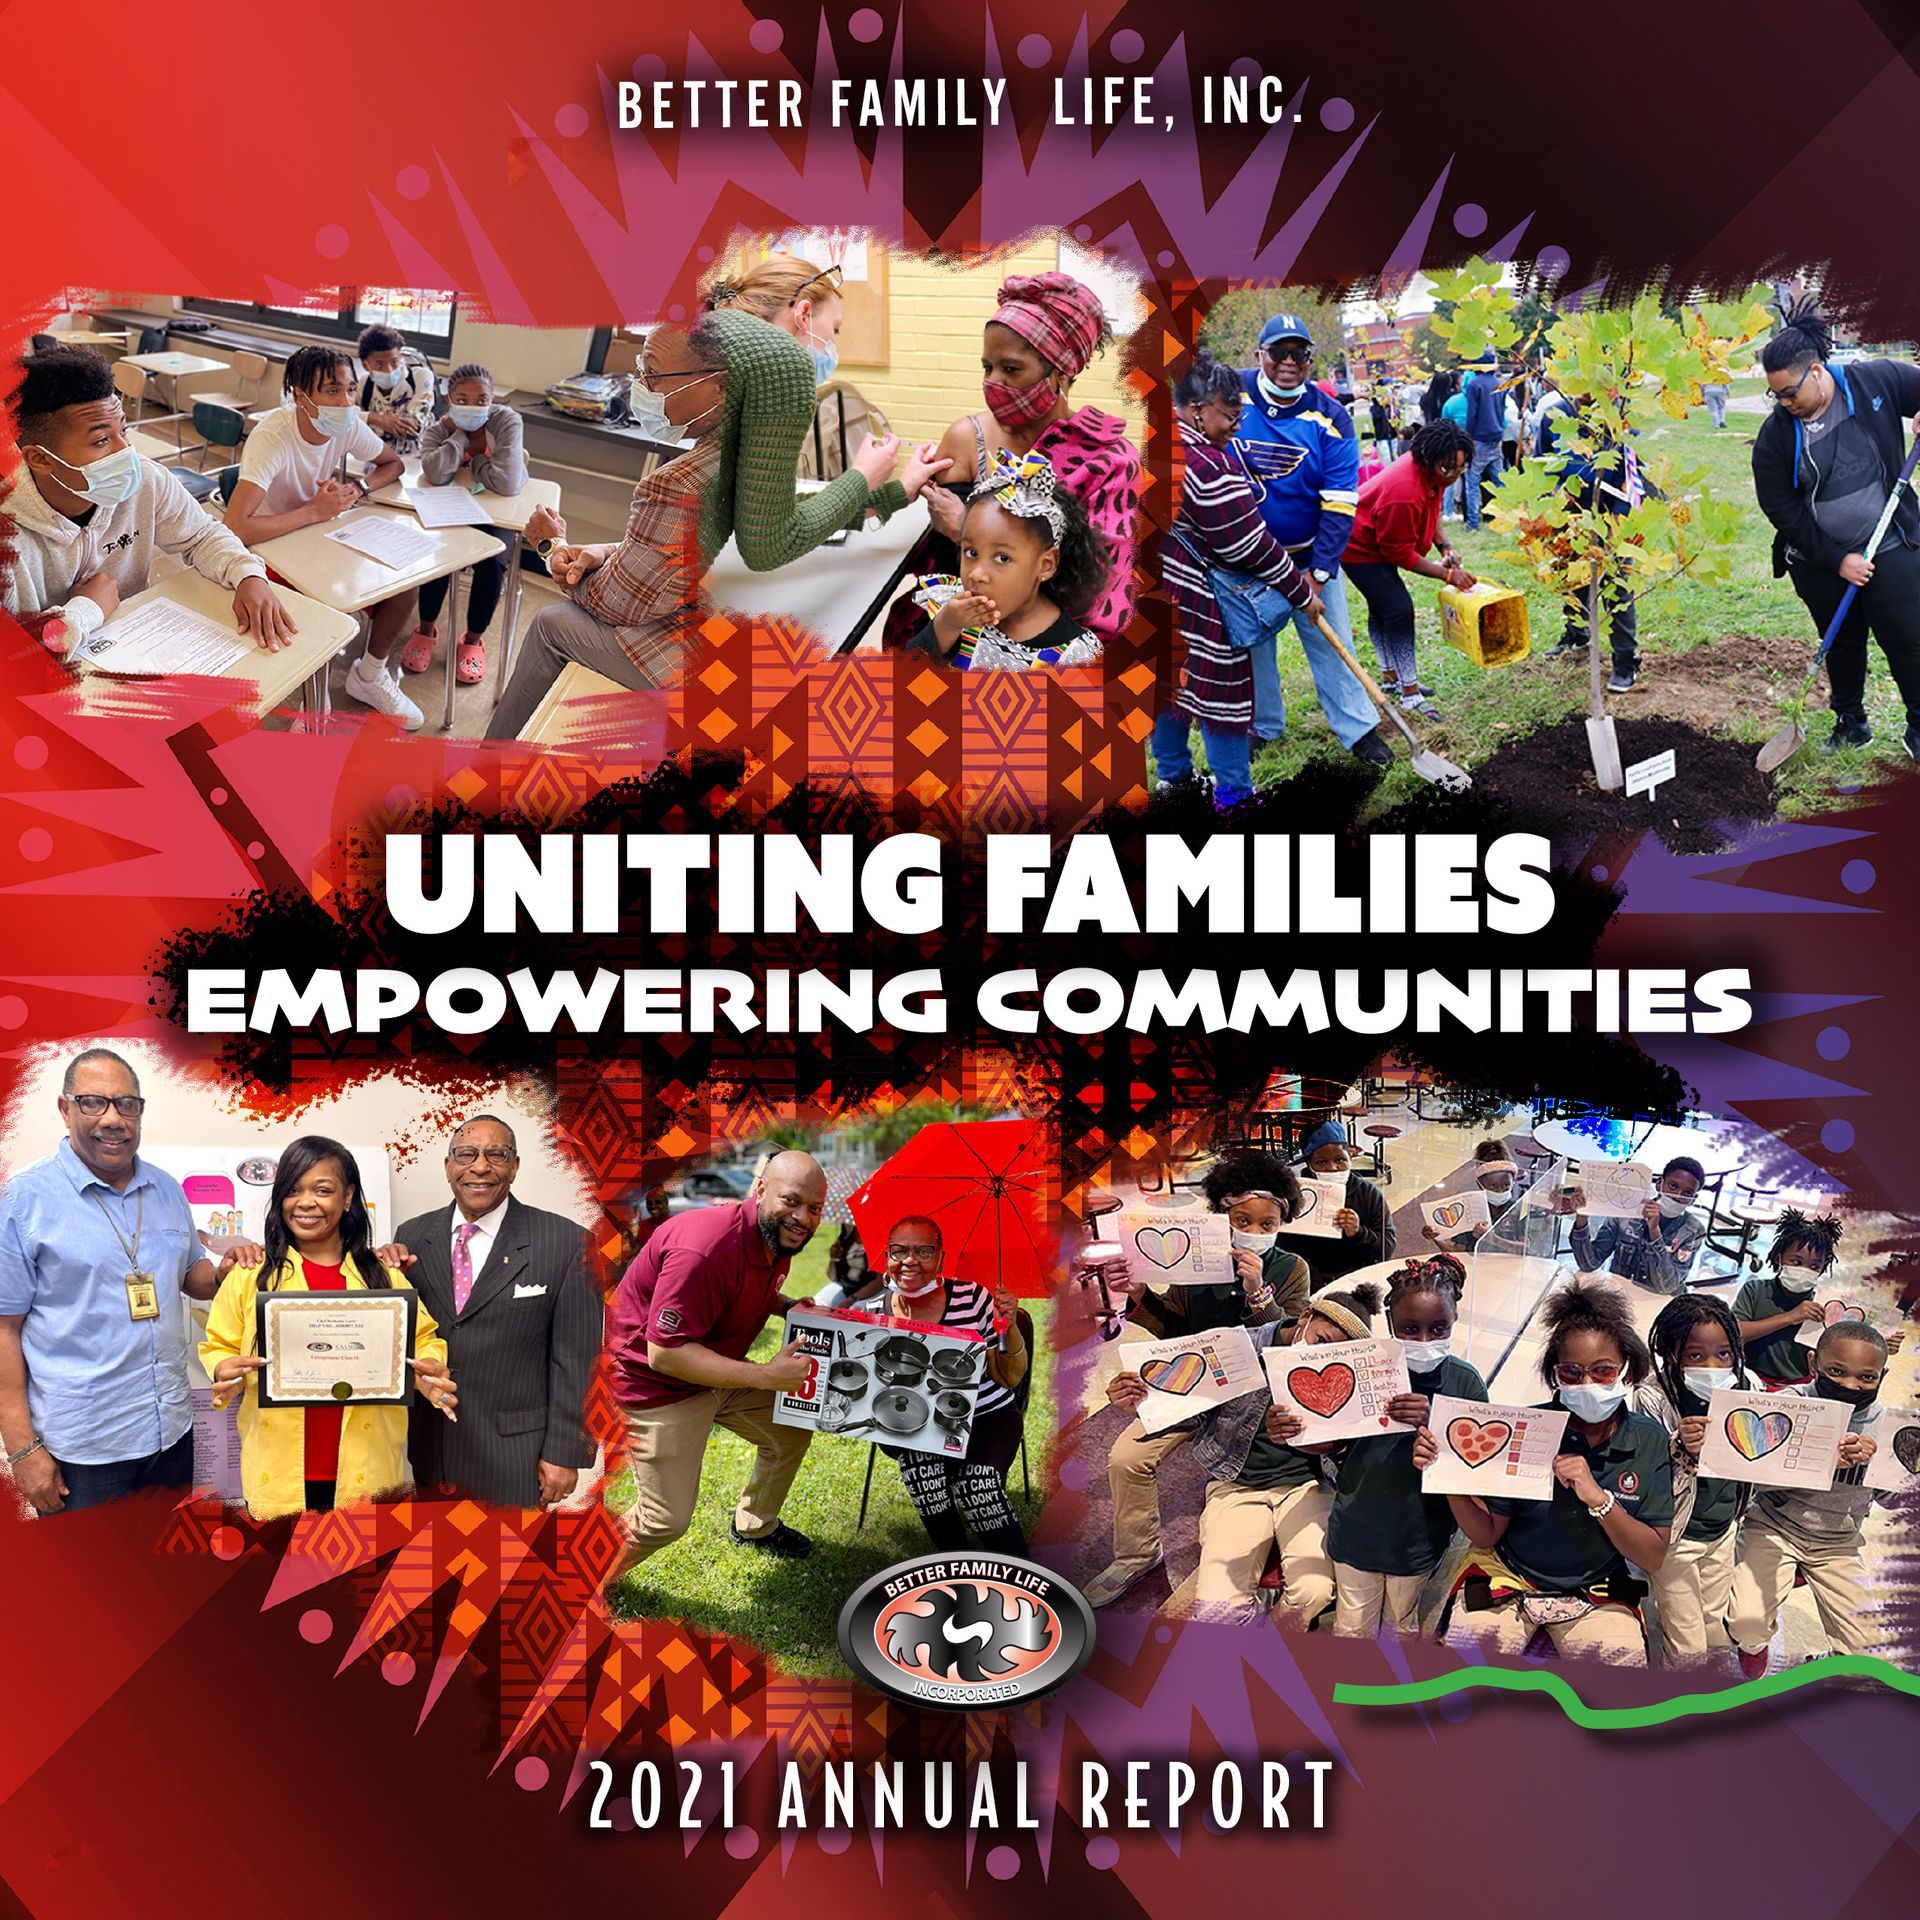 Better Family Life Impacts